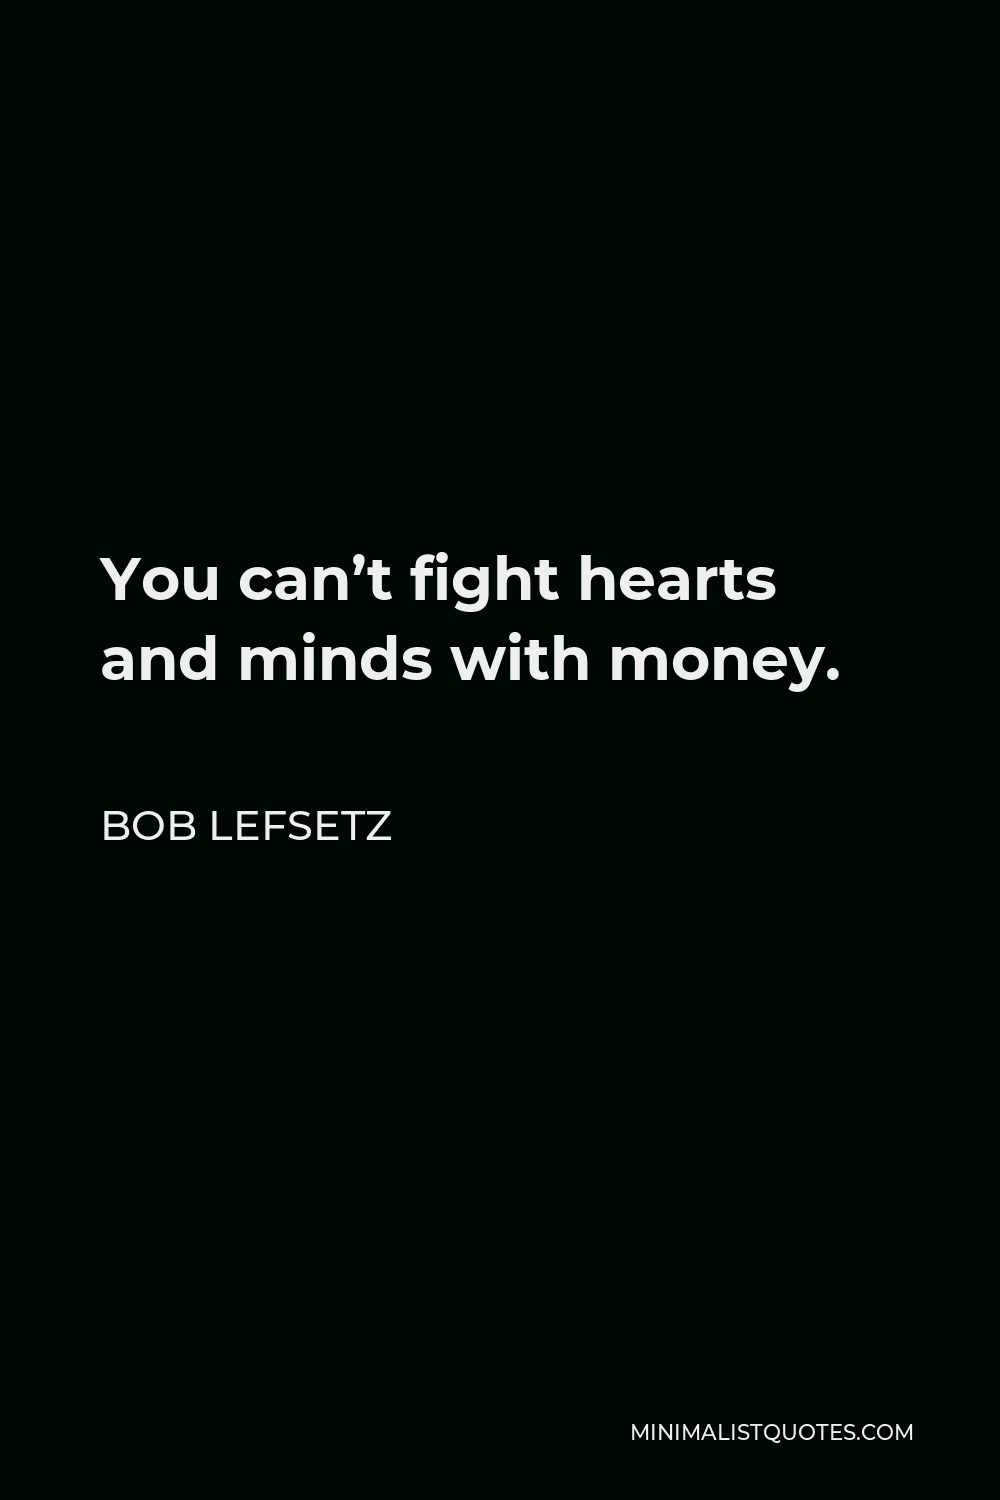 Bob Lefsetz Quote - You can’t fight hearts and minds with money.